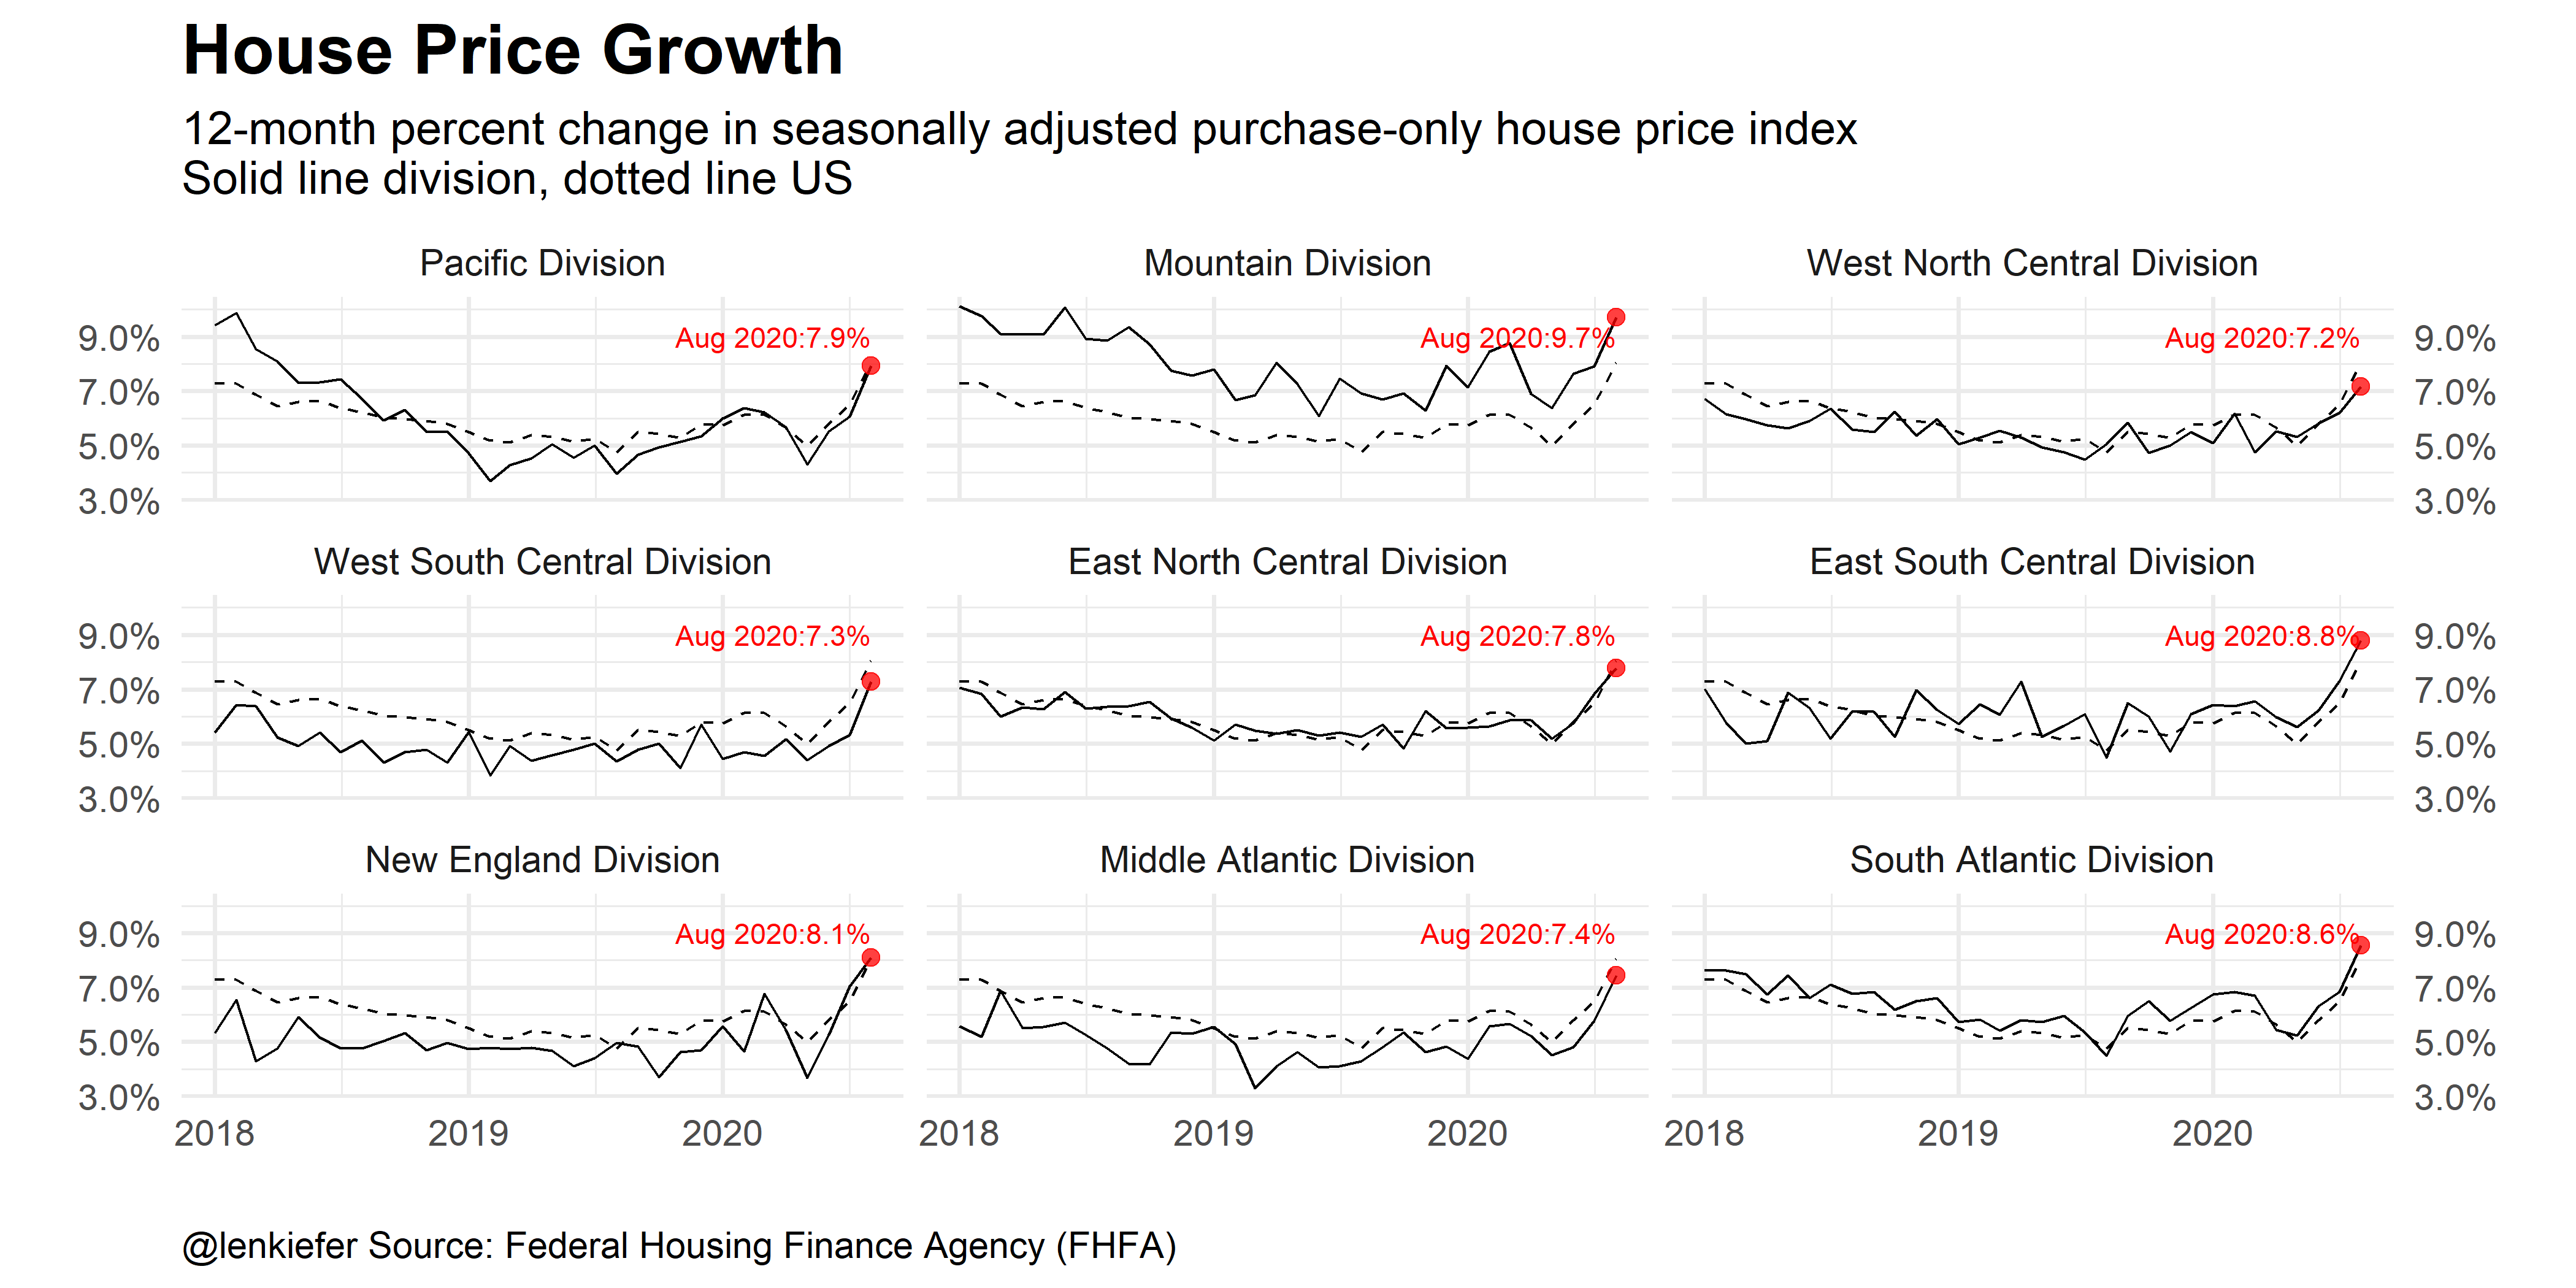 Regional trend charts of house price trends in the US